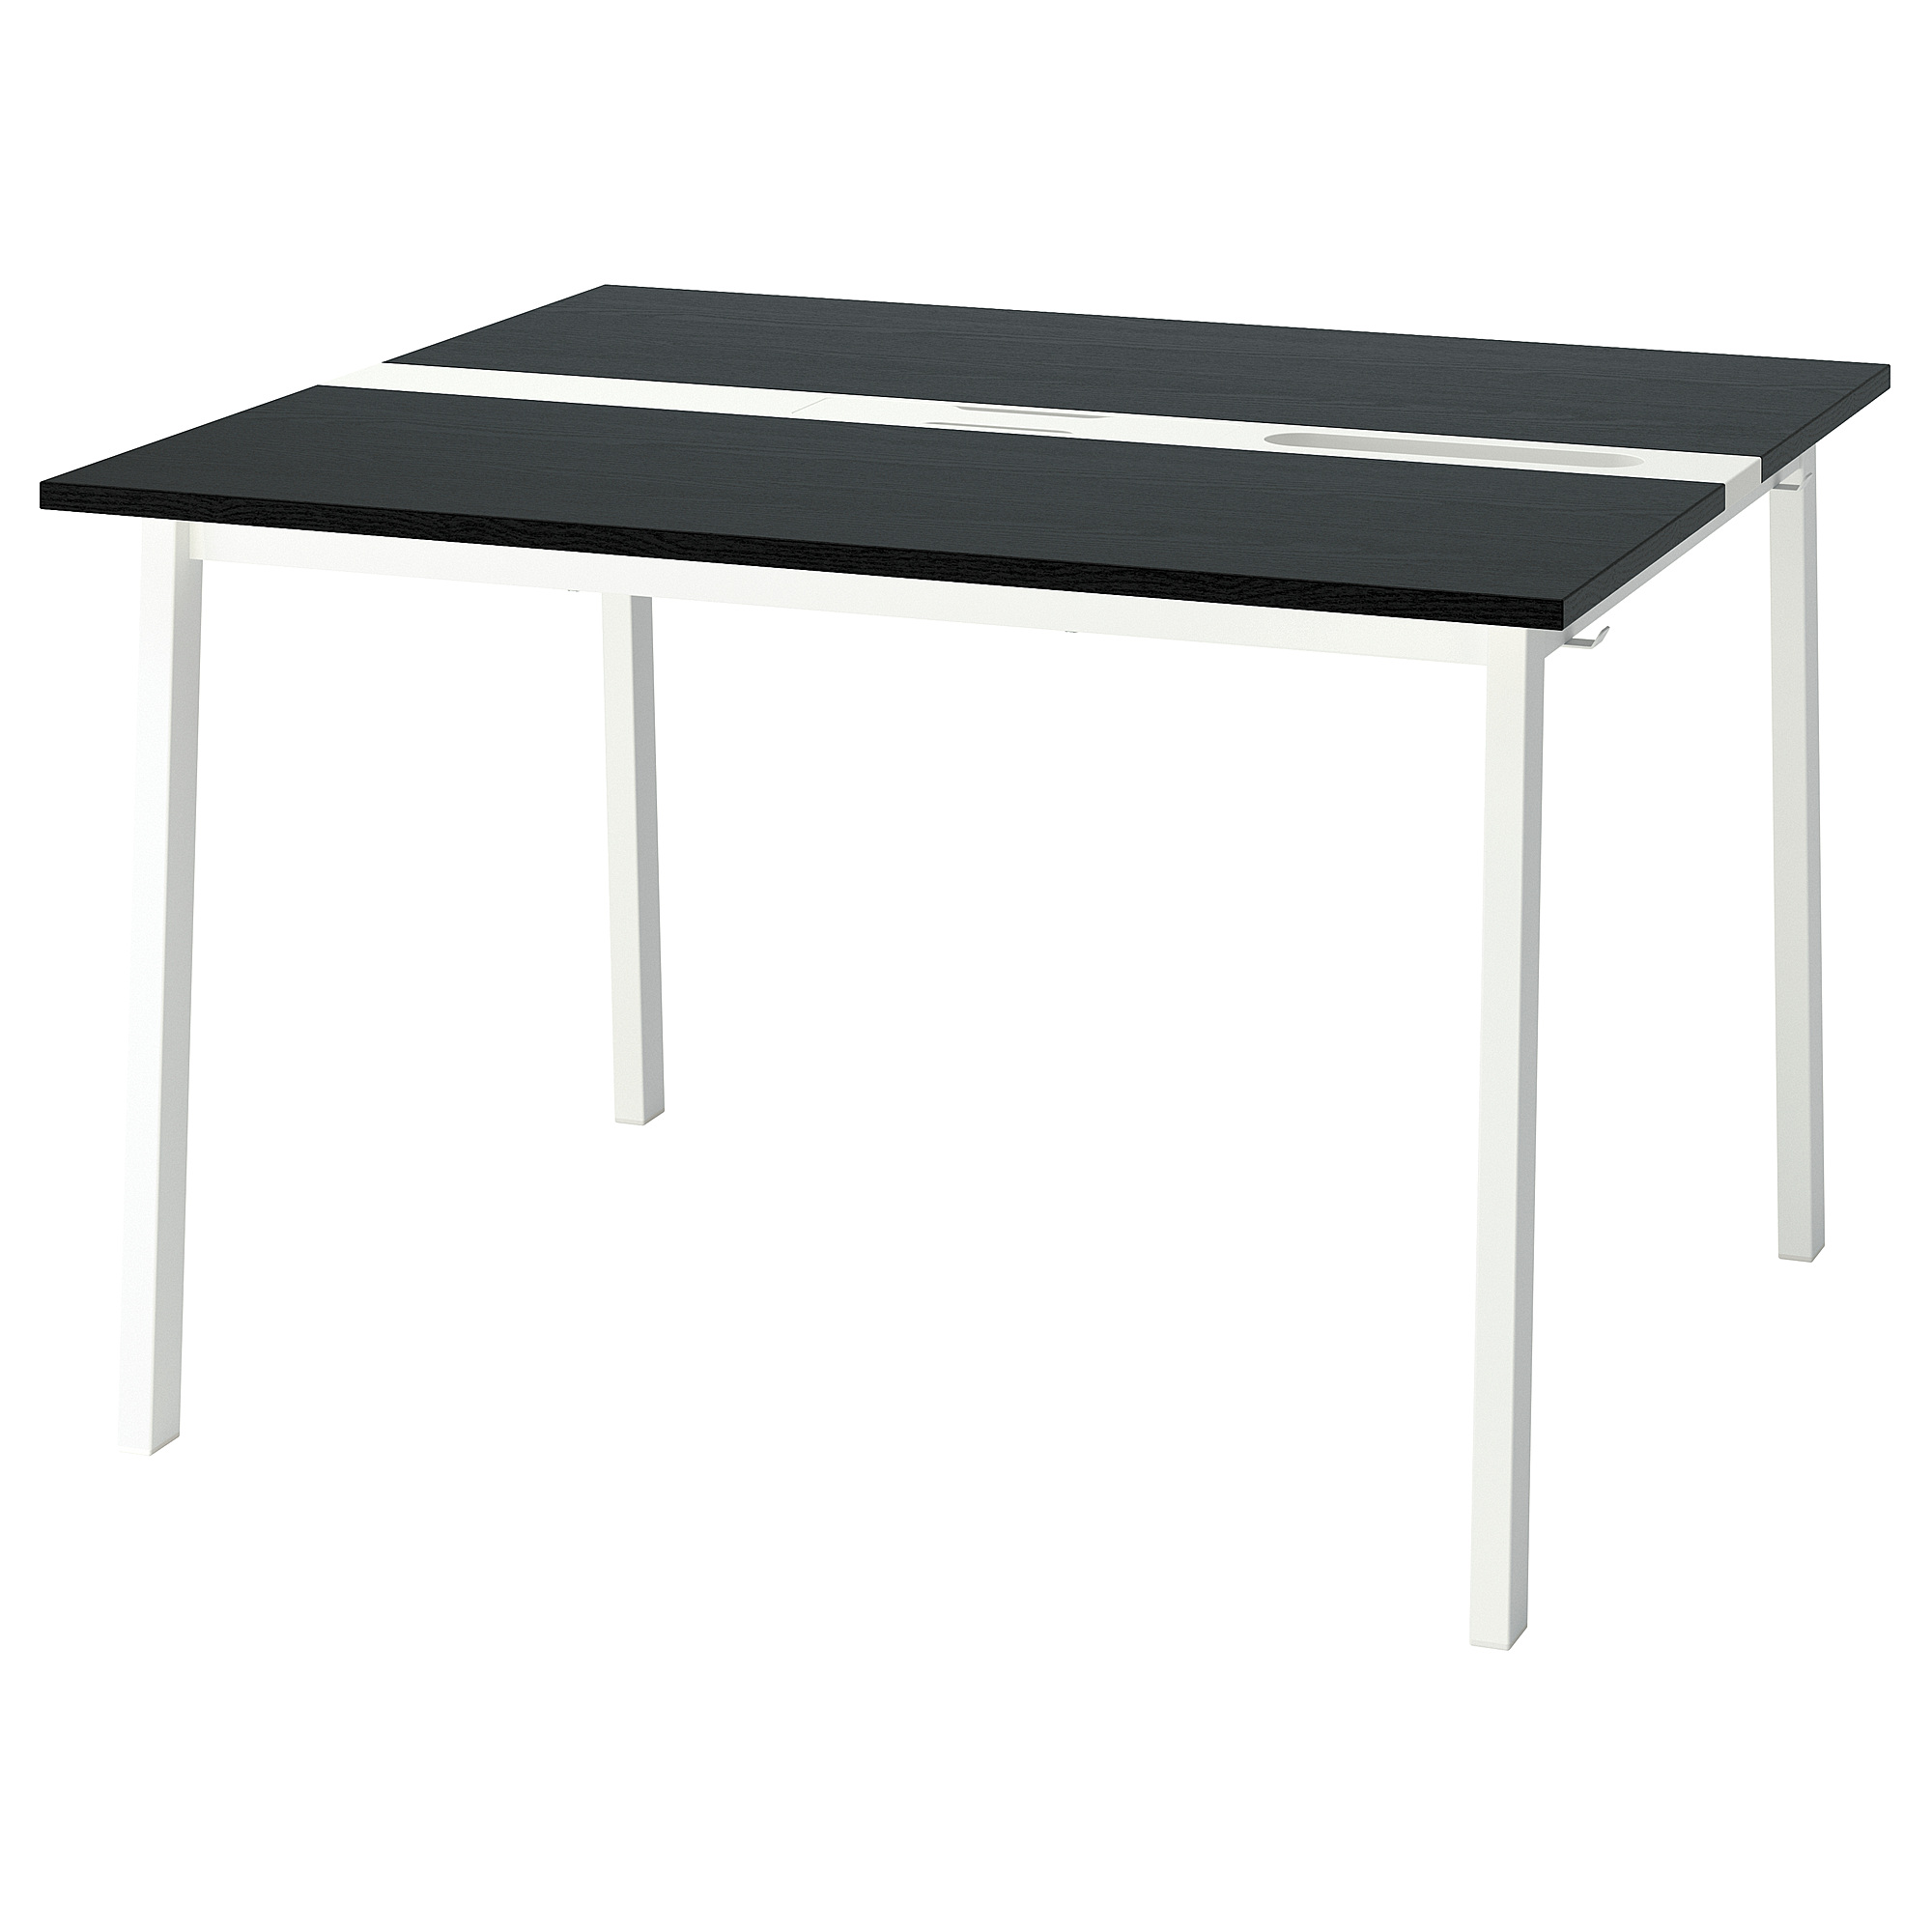 MITTZON table top